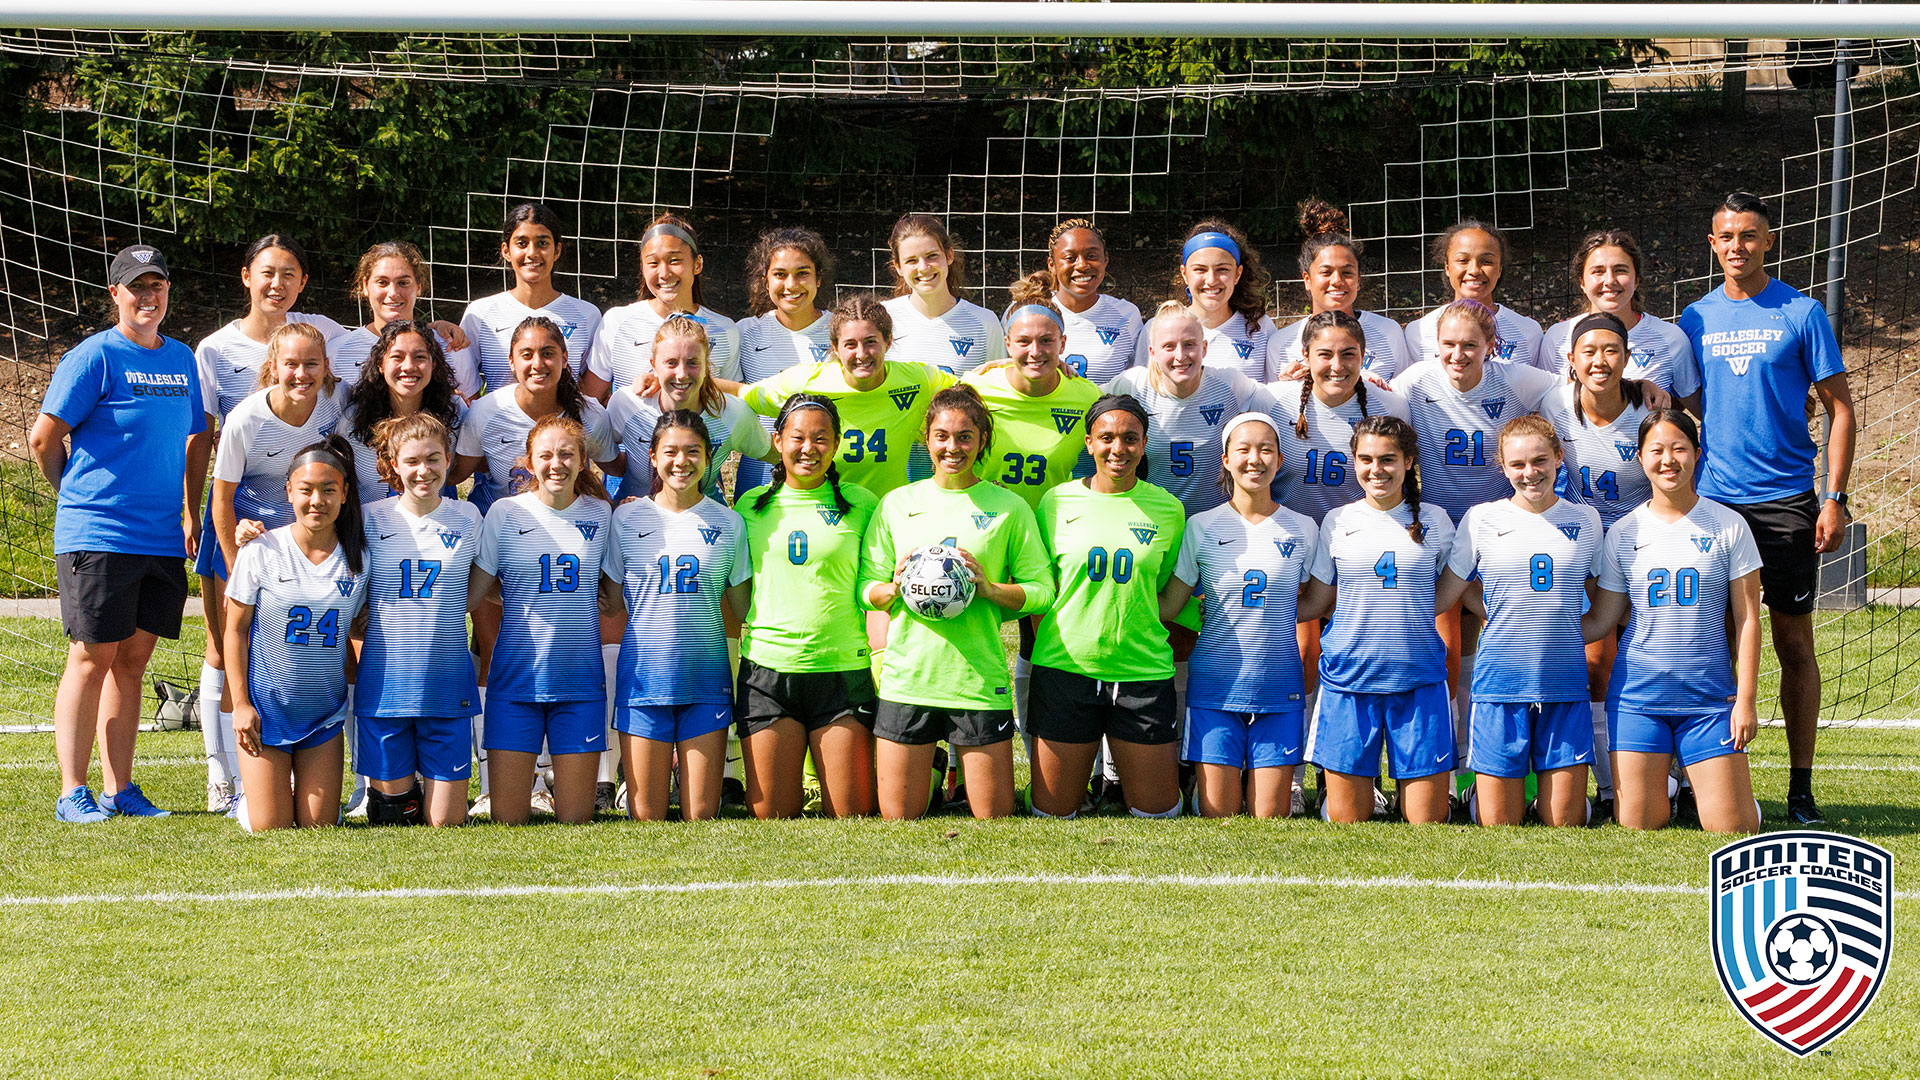 Wellesley soccer earned the United States Coaches College Team Academic Award for a seventh straight year (Frank Poulin)